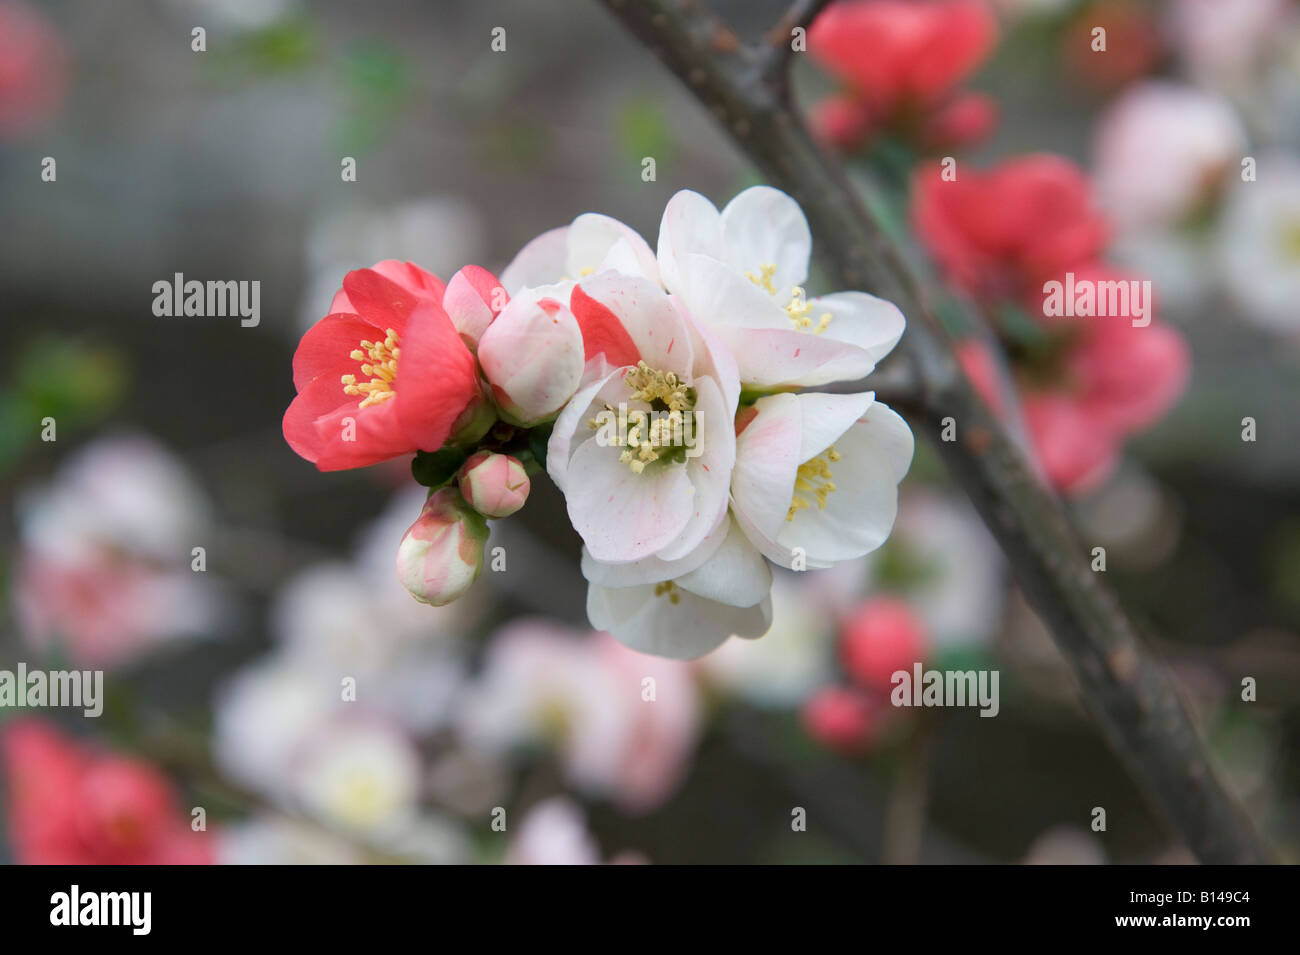 Kyoto, Japan. Chaenomeles japonica 'toyo nishiki' (Japanese Quince), which bears both red and white flowers on the same branch. Stock Photo